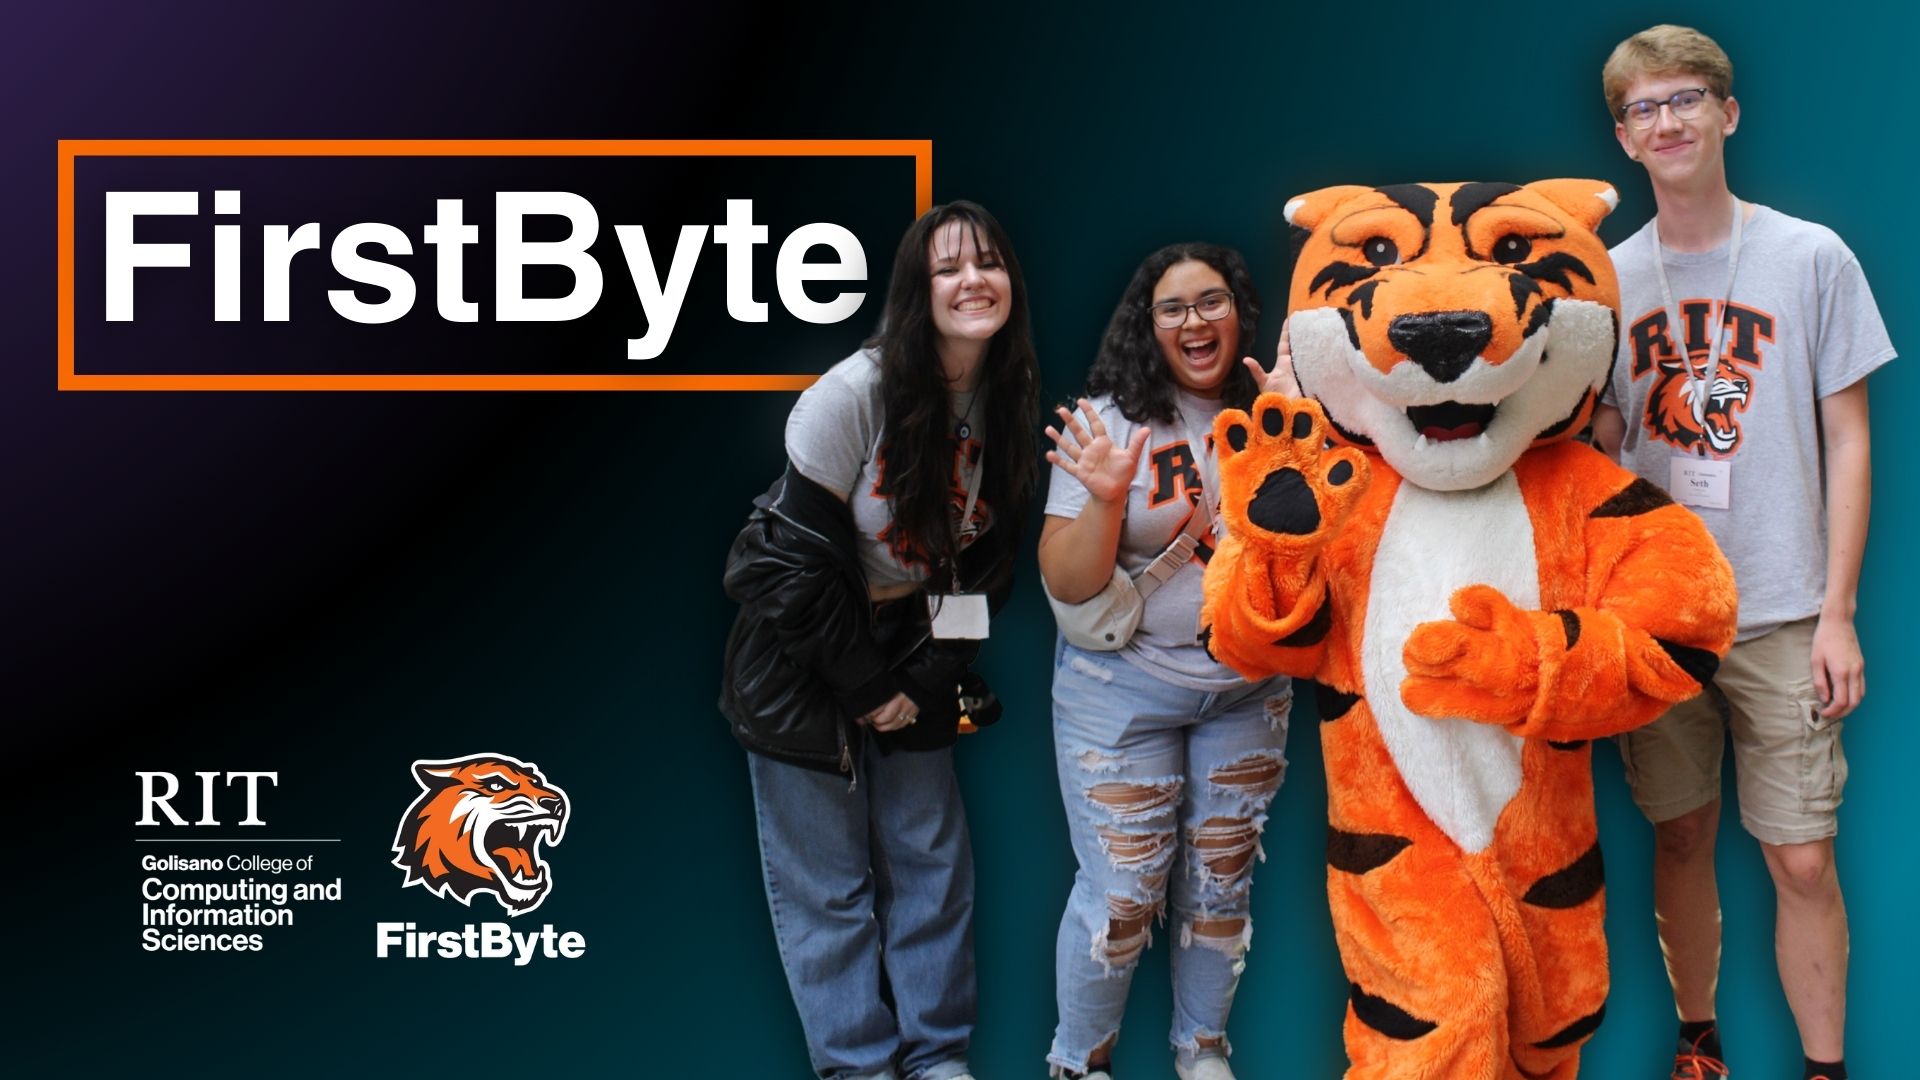 Students smiling with Ritchie the Tiger and the words FirstByte